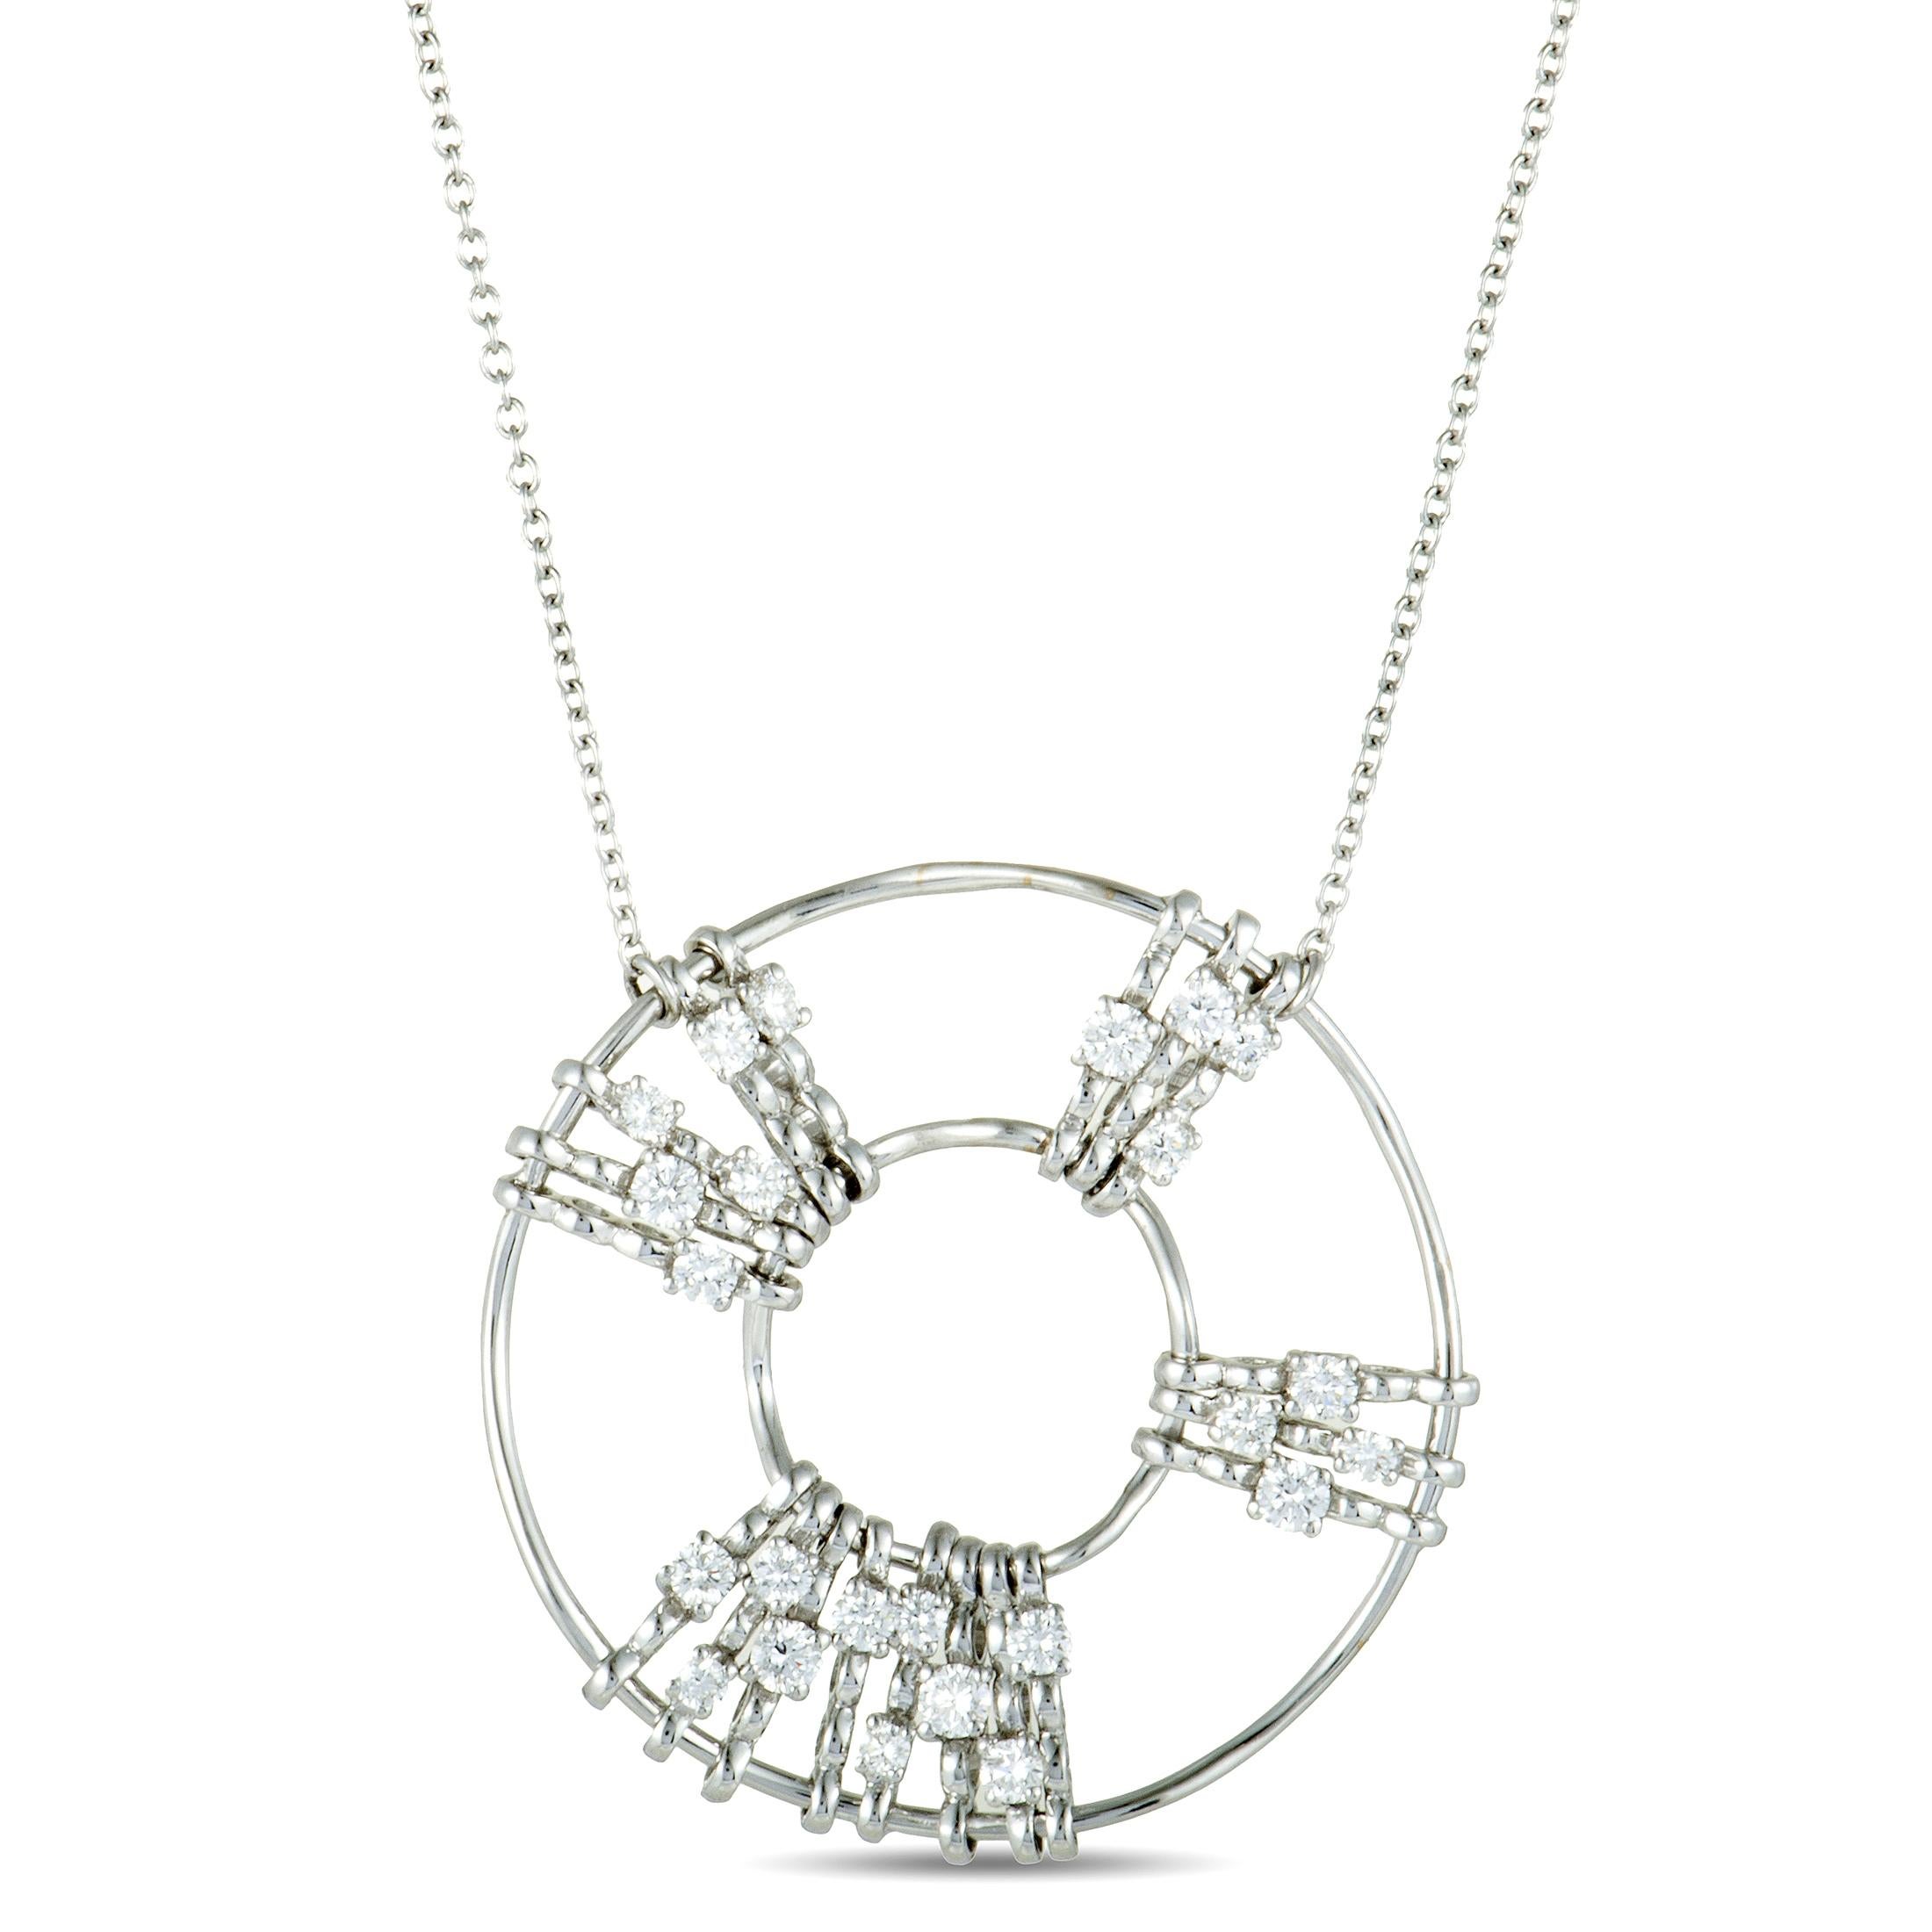 Presented on a nifty rolo chain, the intriguingly stylized pendant gives an exceptionally refined appeal to this wonderful necklace. The necklace is beautifully designed by Luca Carati and it is masterfully crafted from elegant 18K white gold,